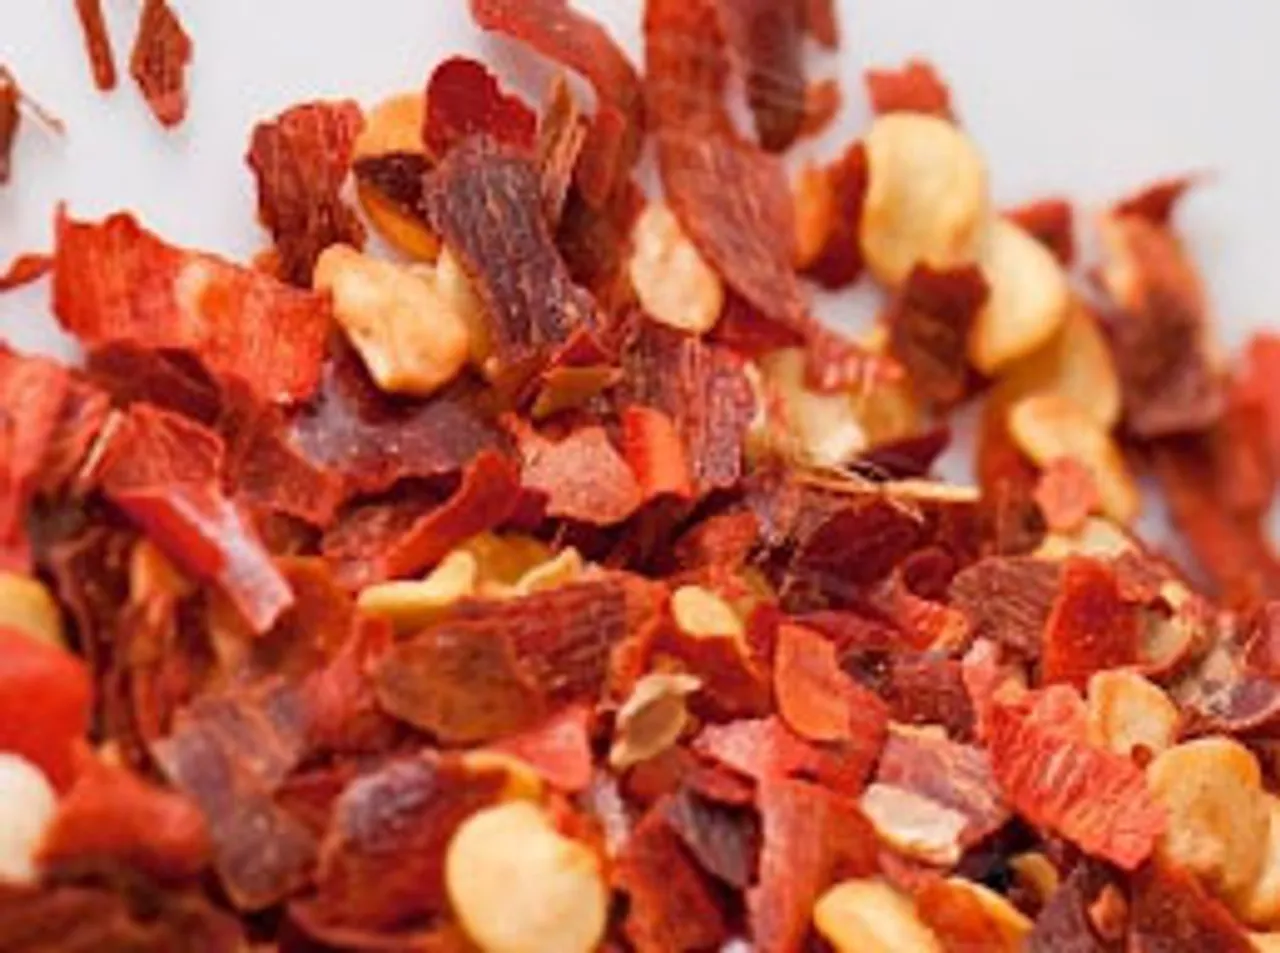 Spice it up with red chilli flakes